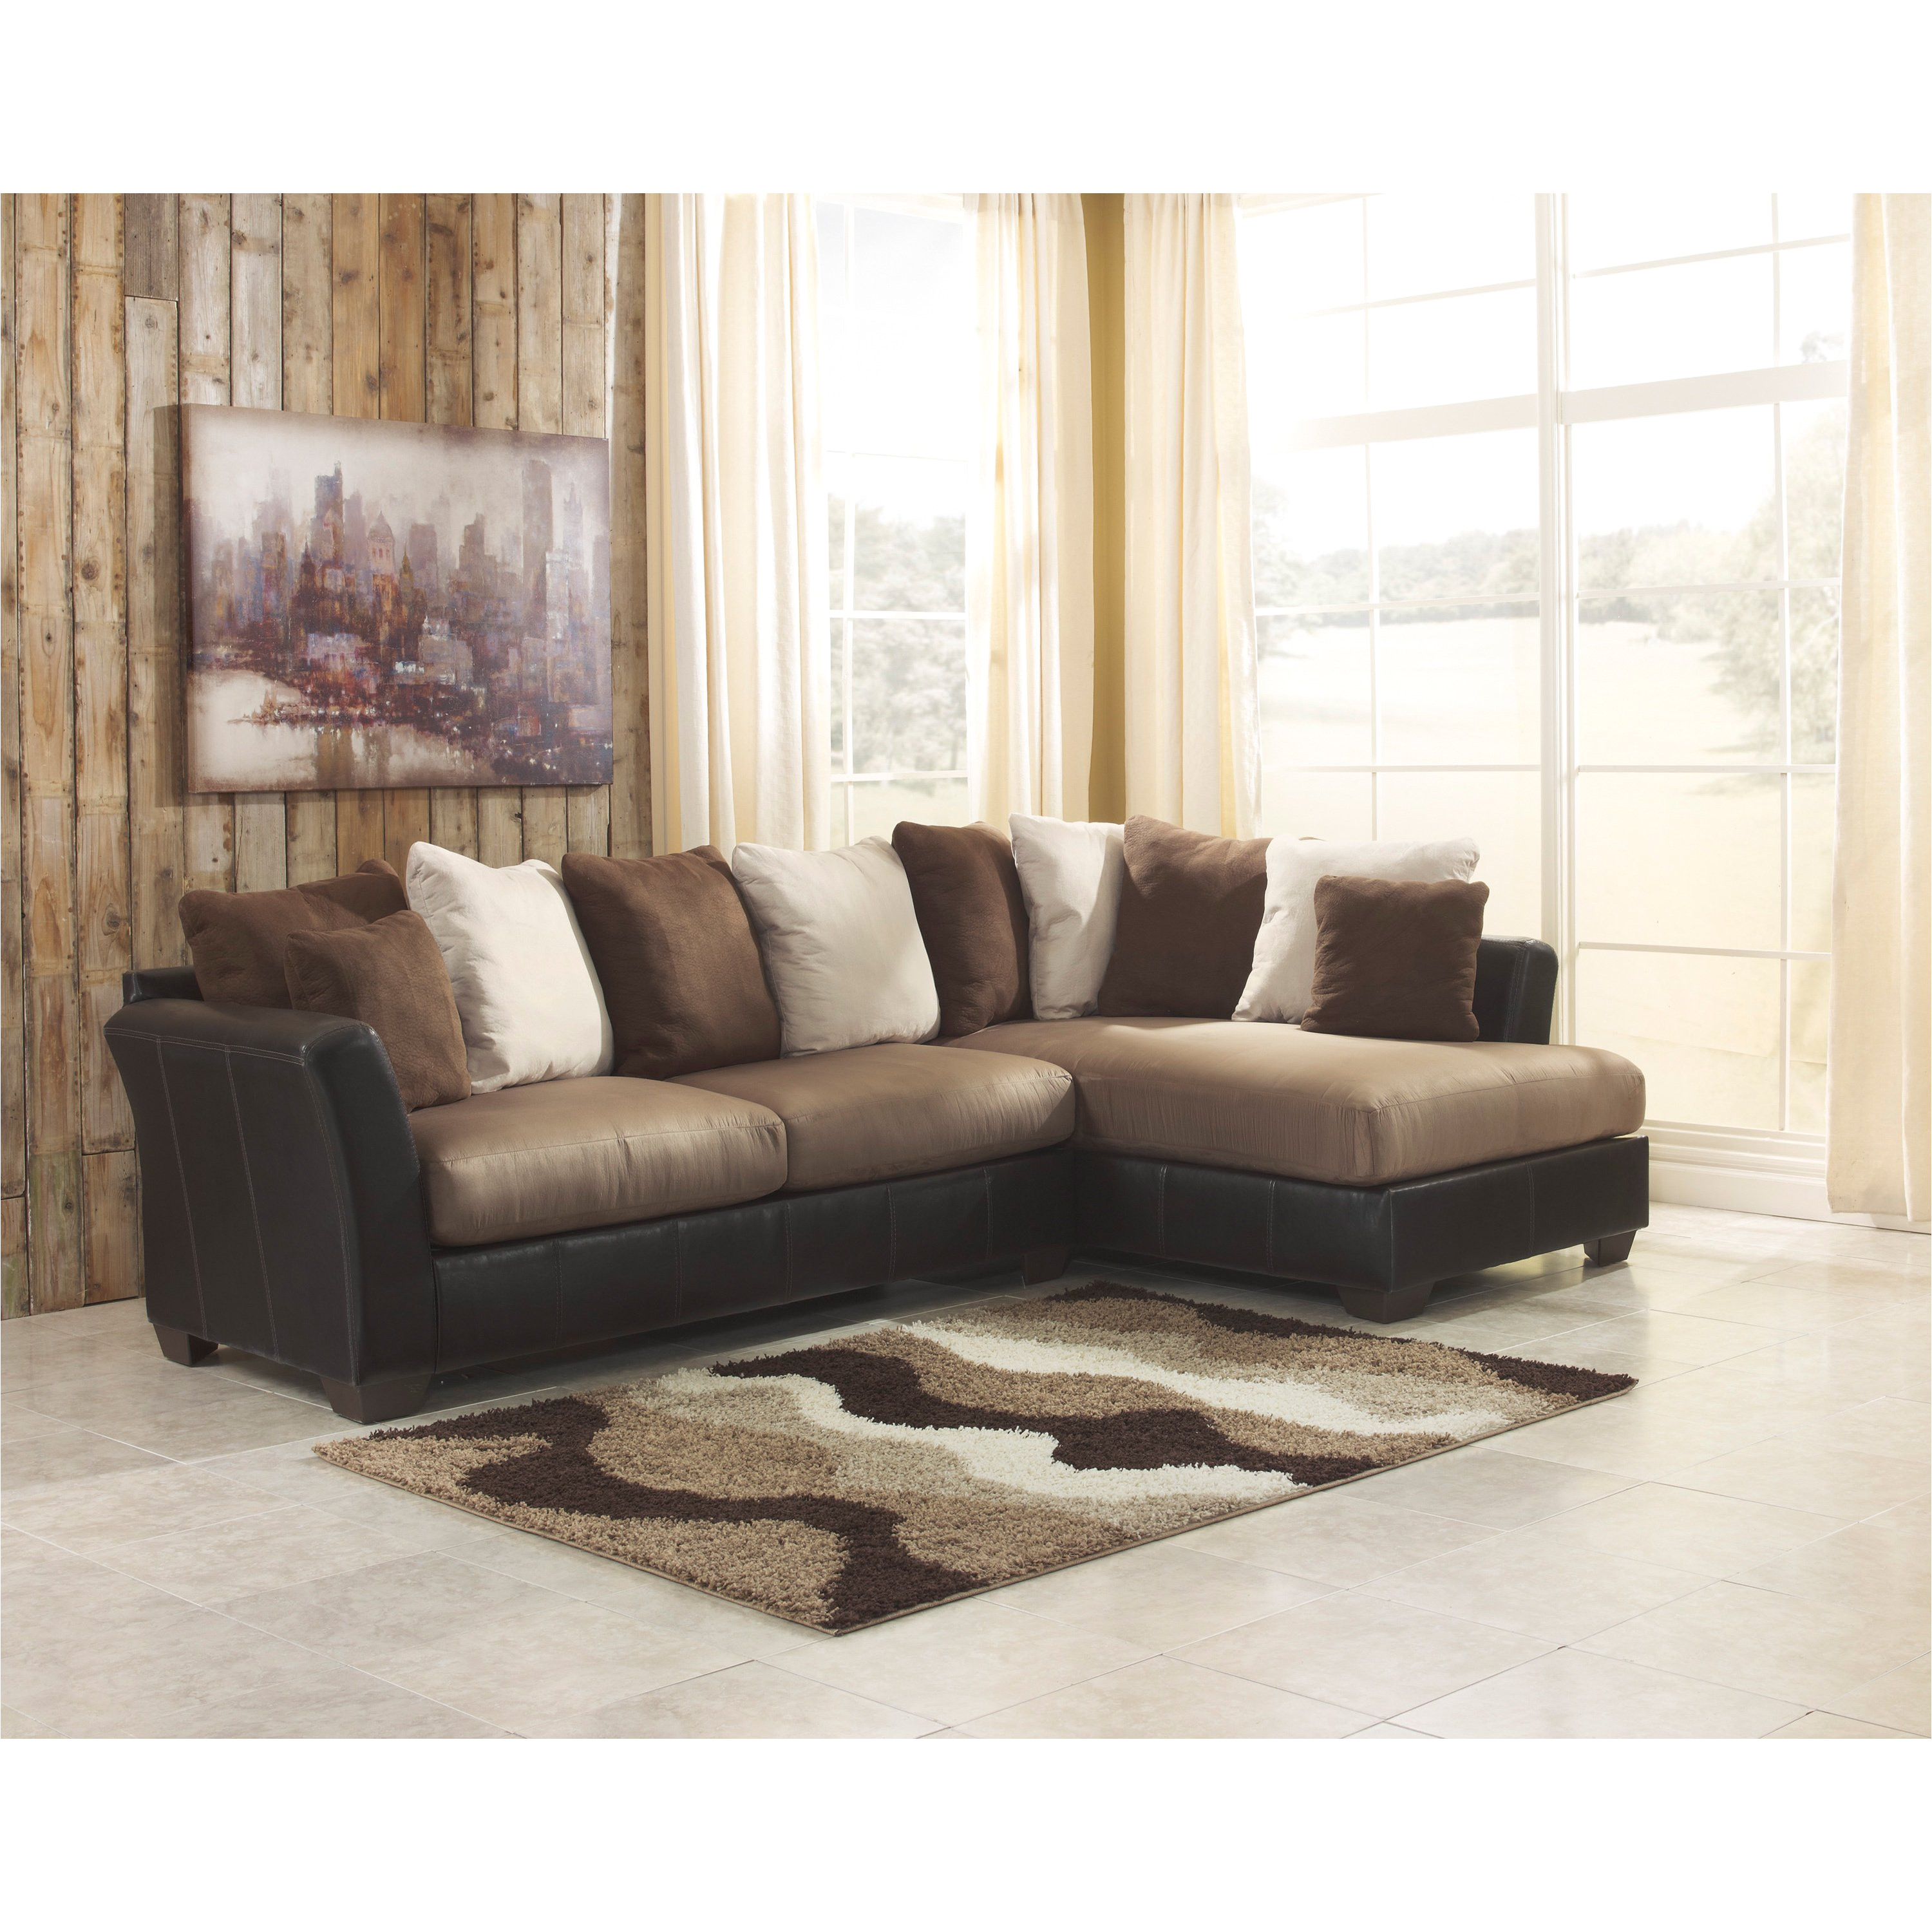 shop signature design by ashley masoli 2 piece mocha corner chaise and sofa sectional free shipping today overstock com 9579463